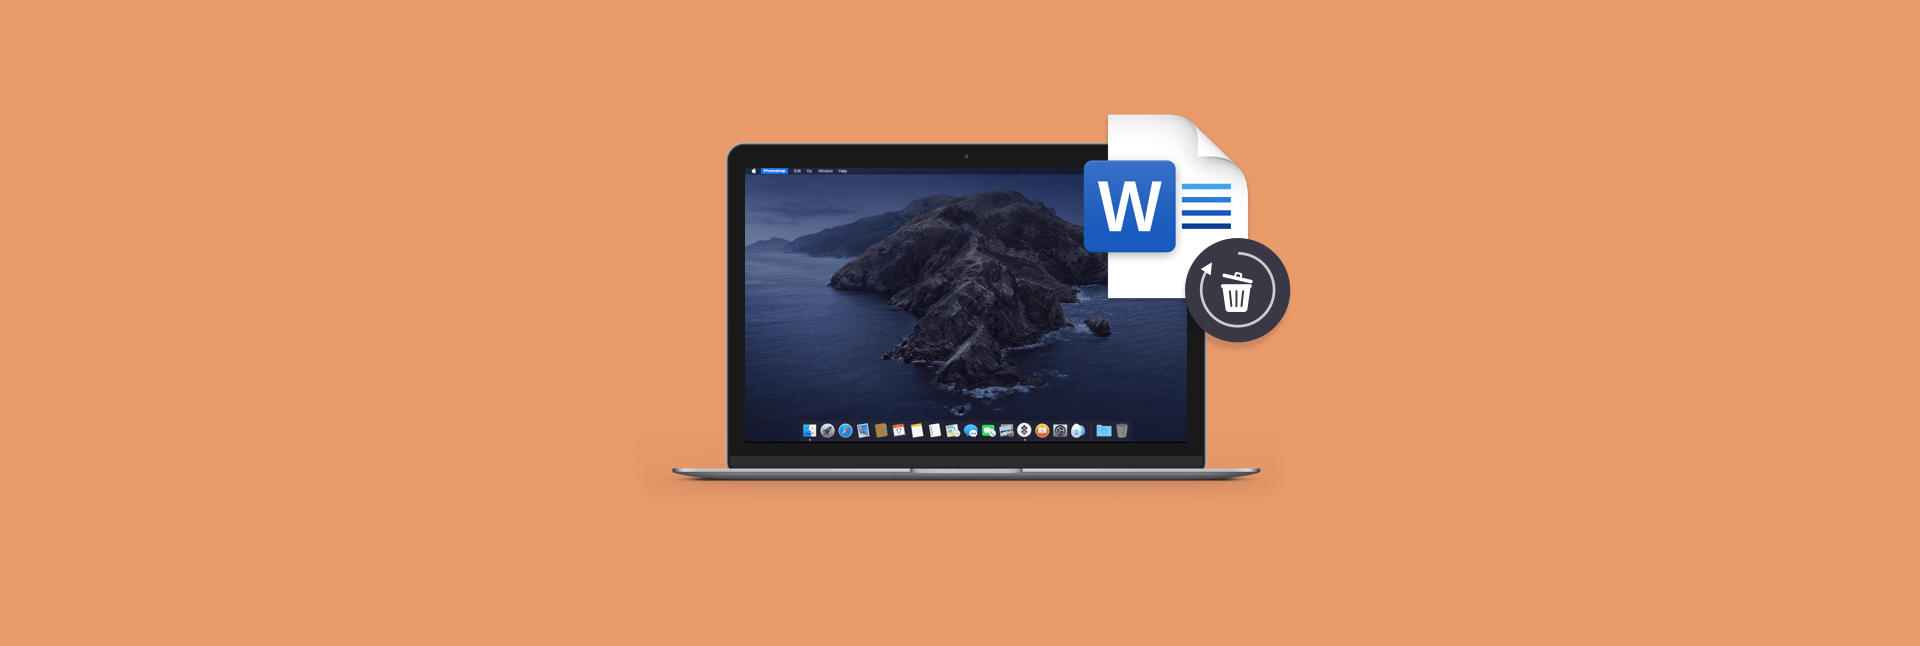 word for mac torrent